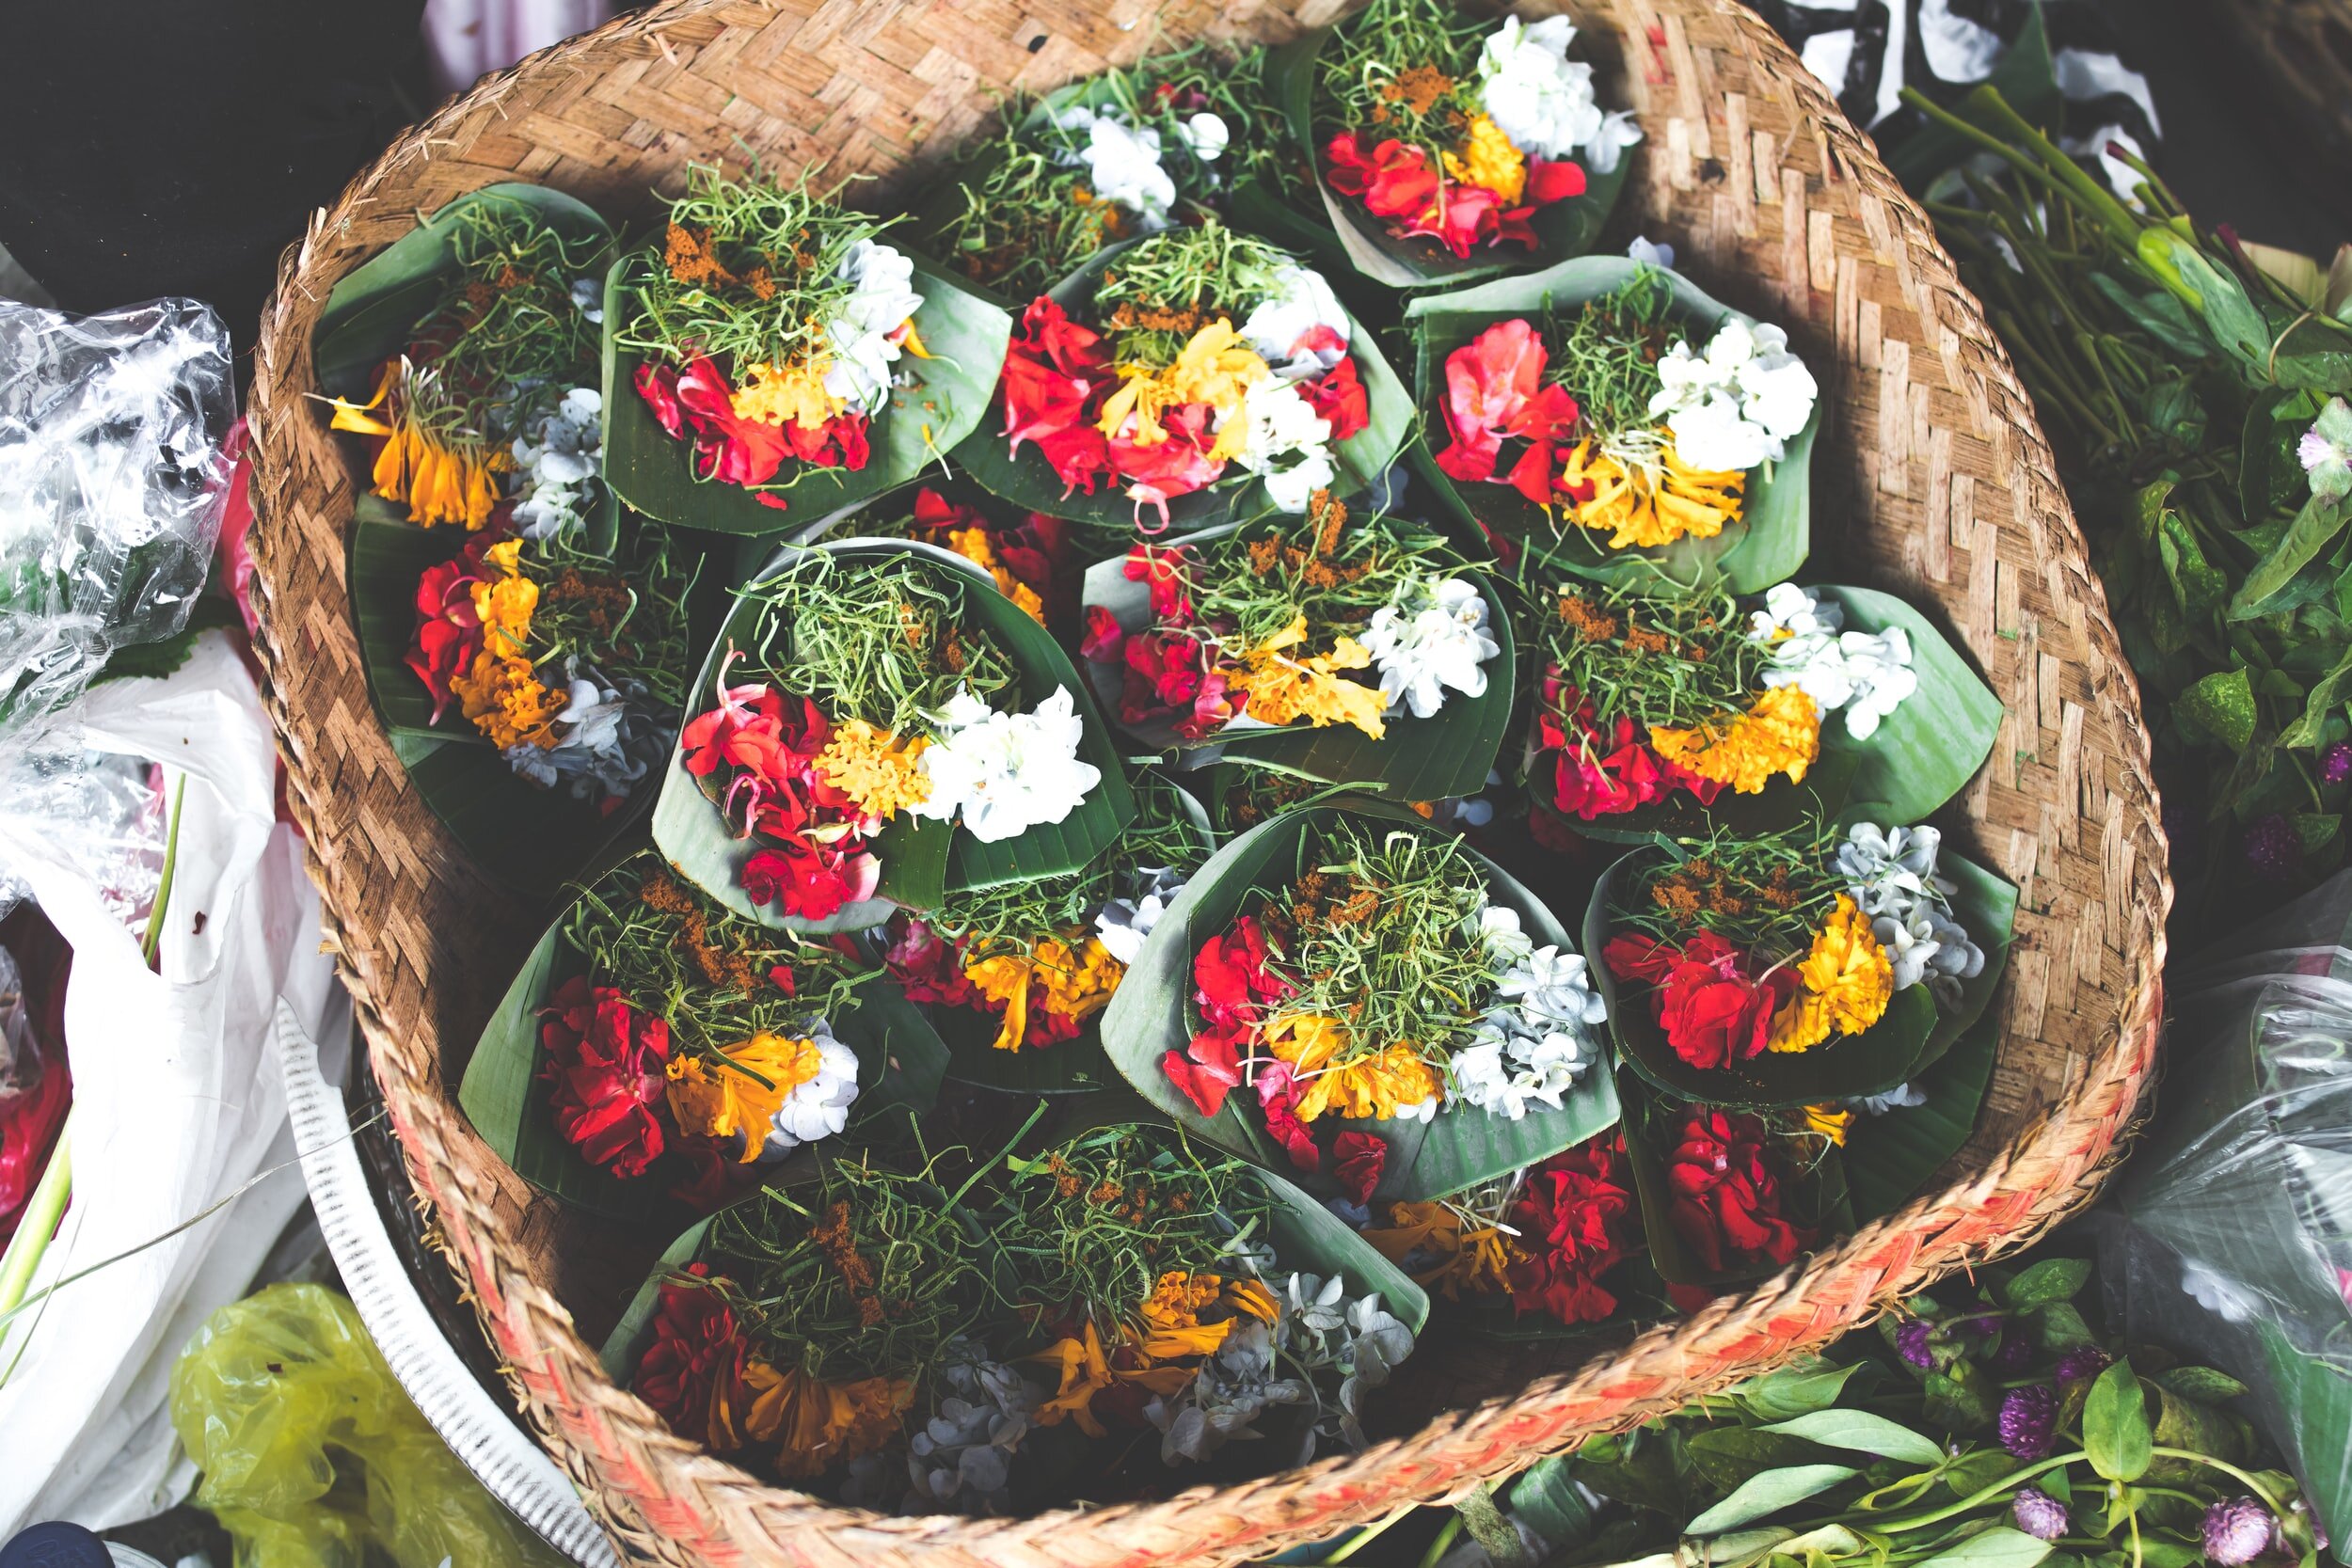 The Flowers of Bali, Traditional Balinese vs Locally Grown non-Balinese  Flowers